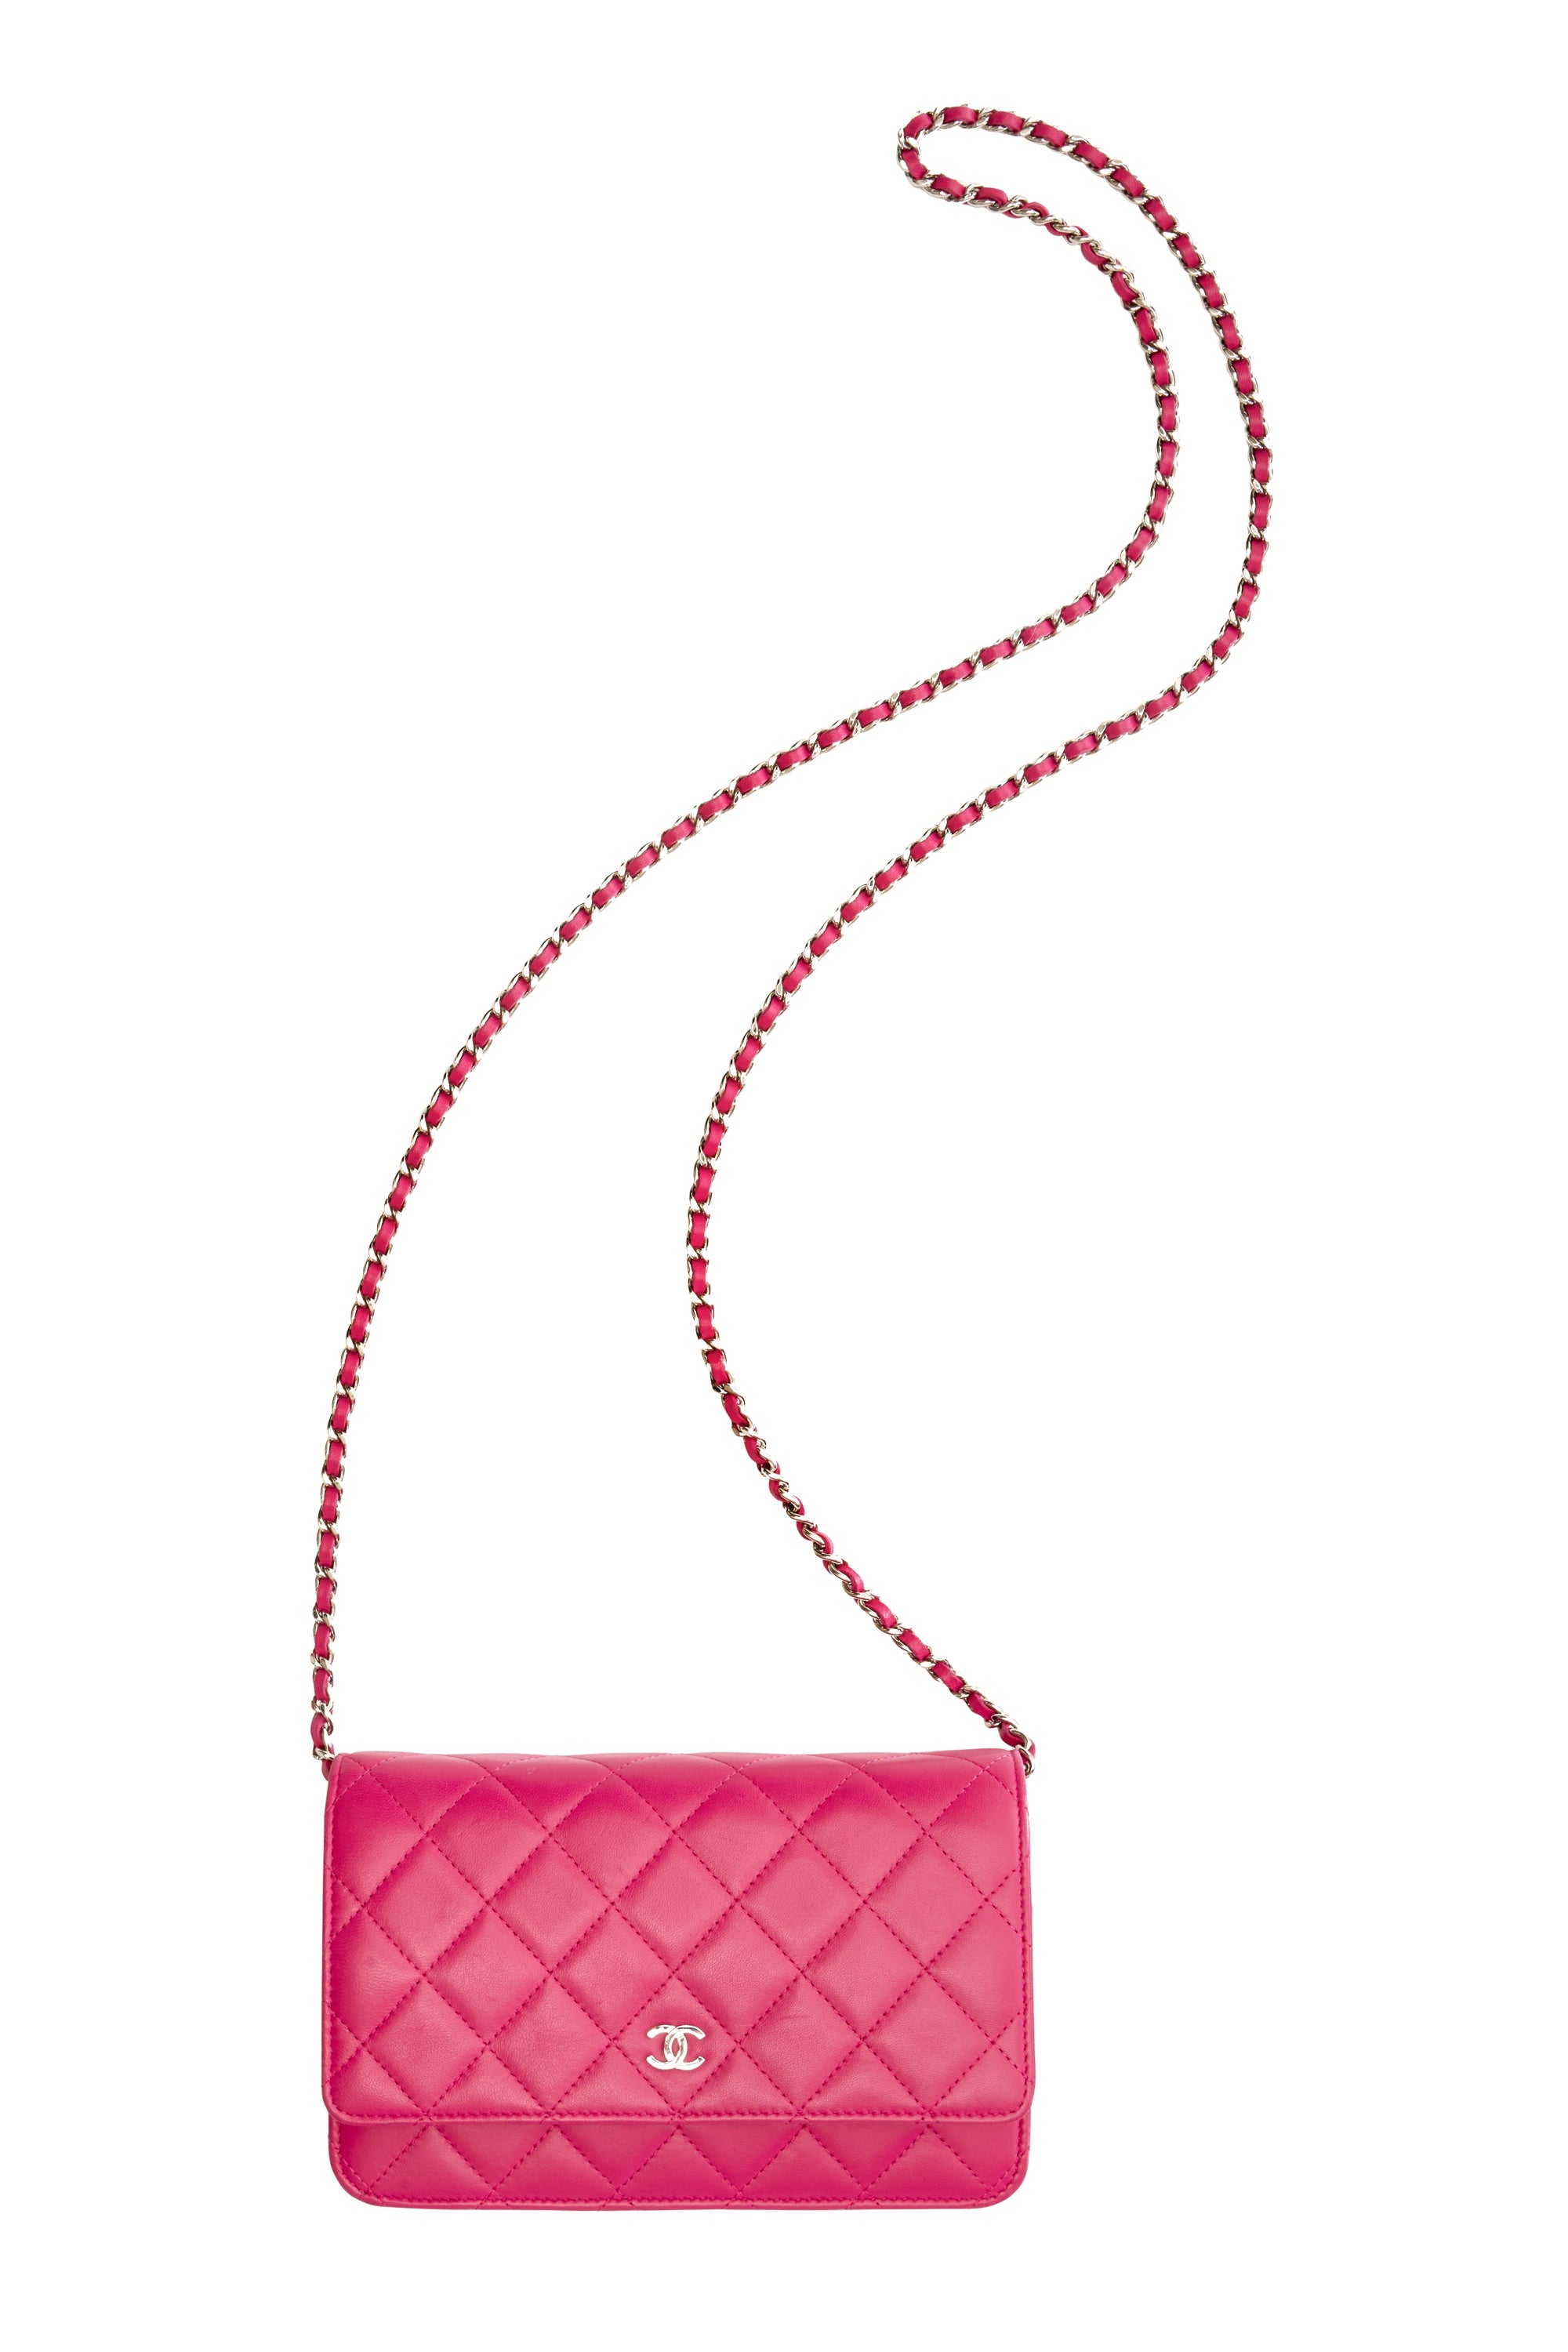 Chanel Pink Quilted Wallet on a Chain 2014 - Foxy Couture Carmel